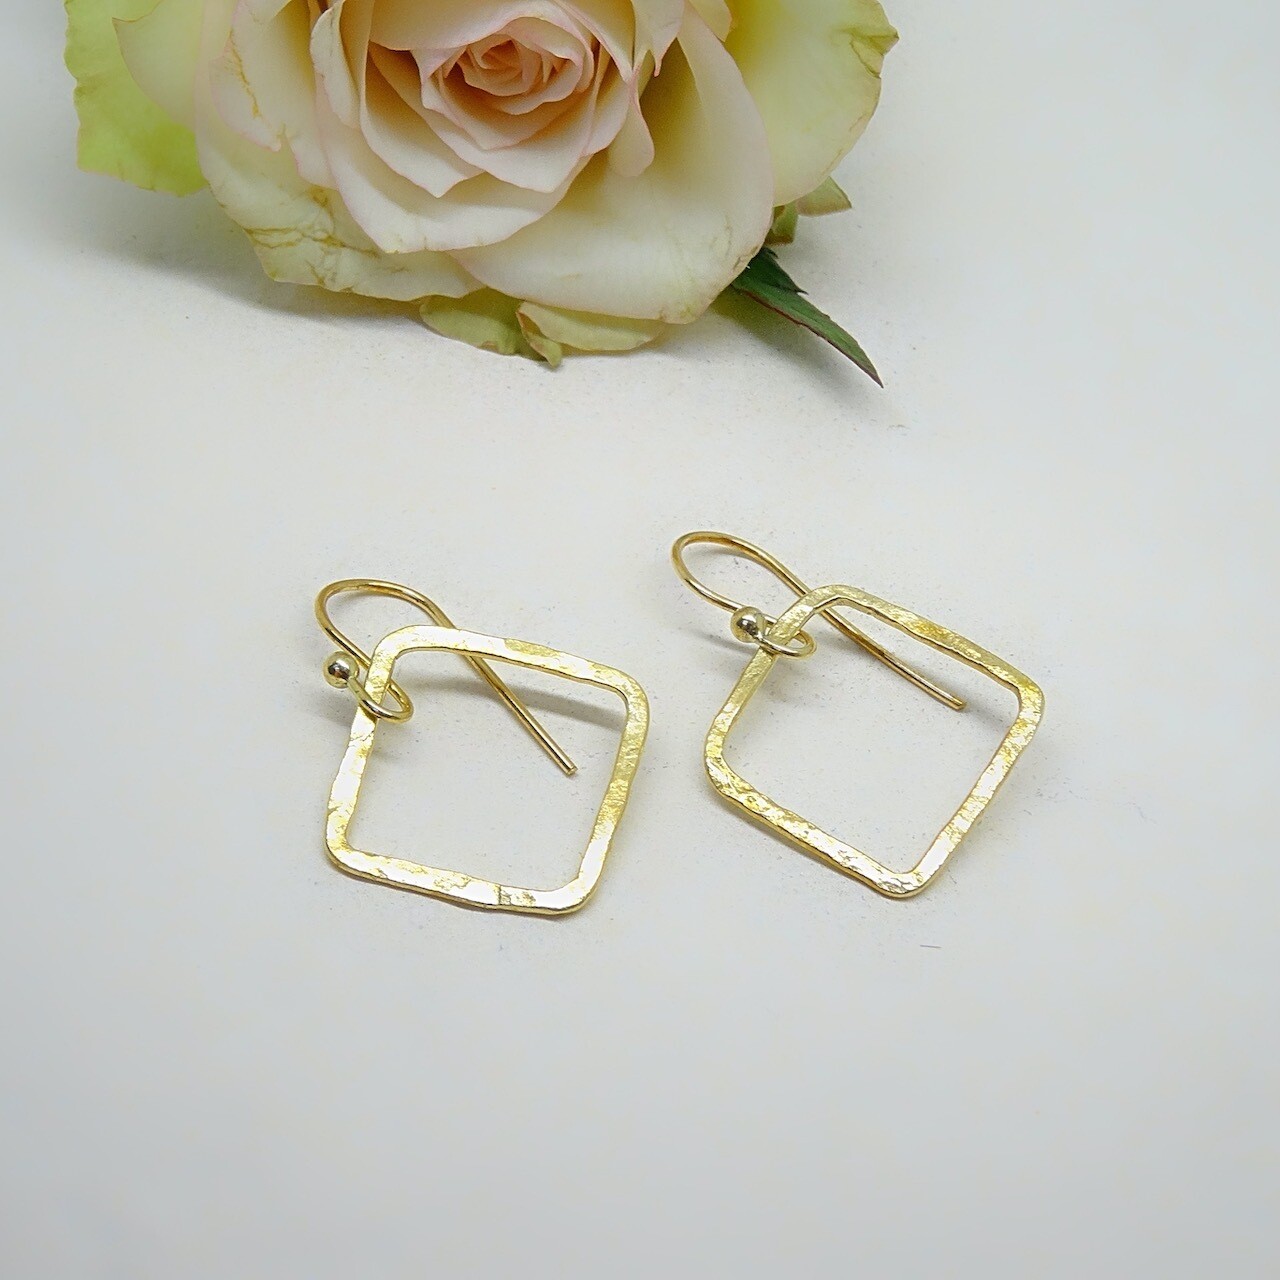 Silver earrings - Square